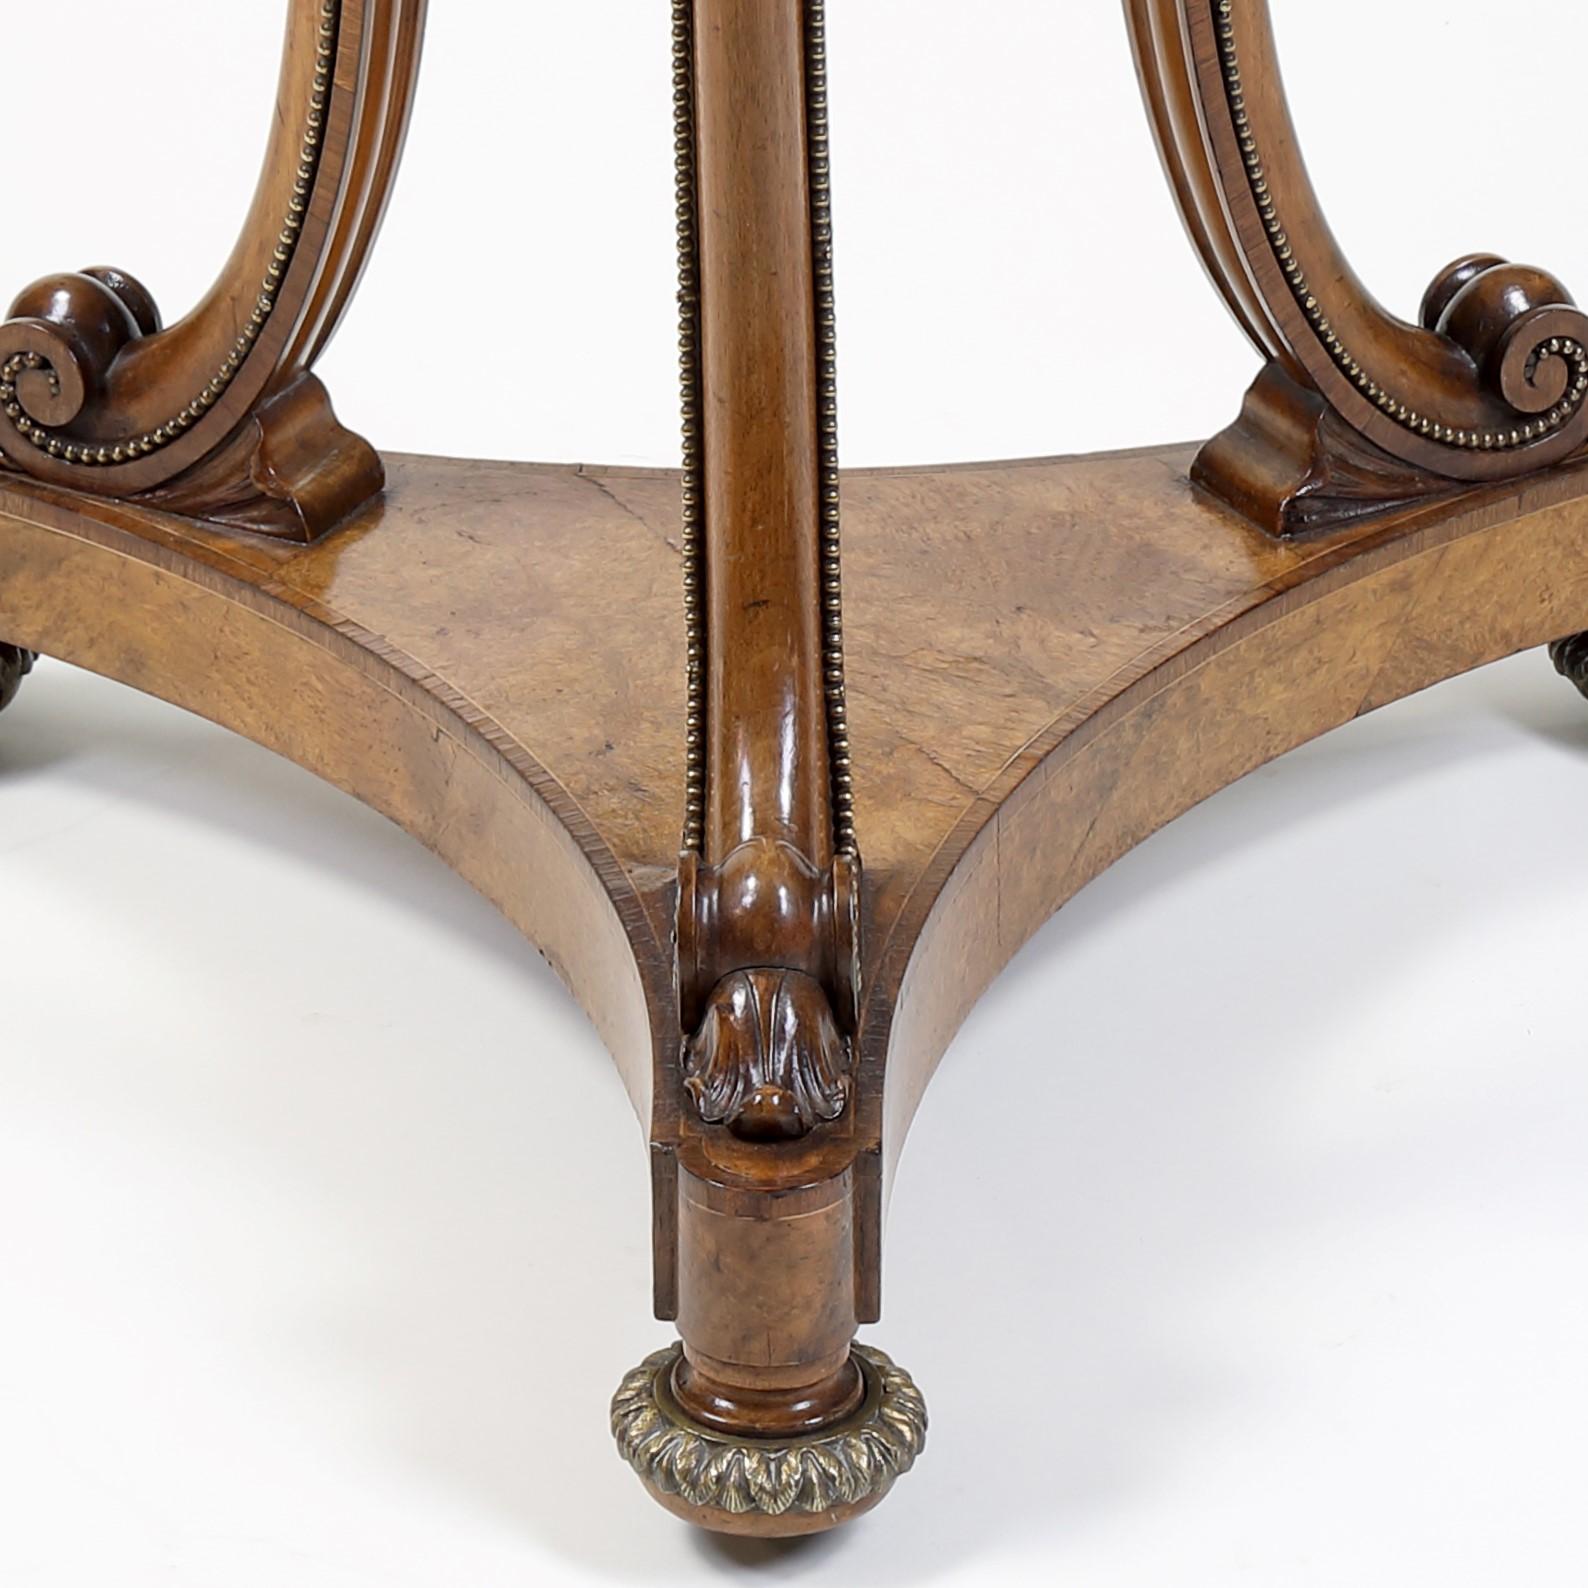 A very fine quality early 19th century burr walnut circular occasional table with ‘Verona-Rosa’ marble top supported on three moulded ‘C’ scroll legs edged with ormolu beading, on a tripartite cross-banded base and gilded bun feet. The legs joined